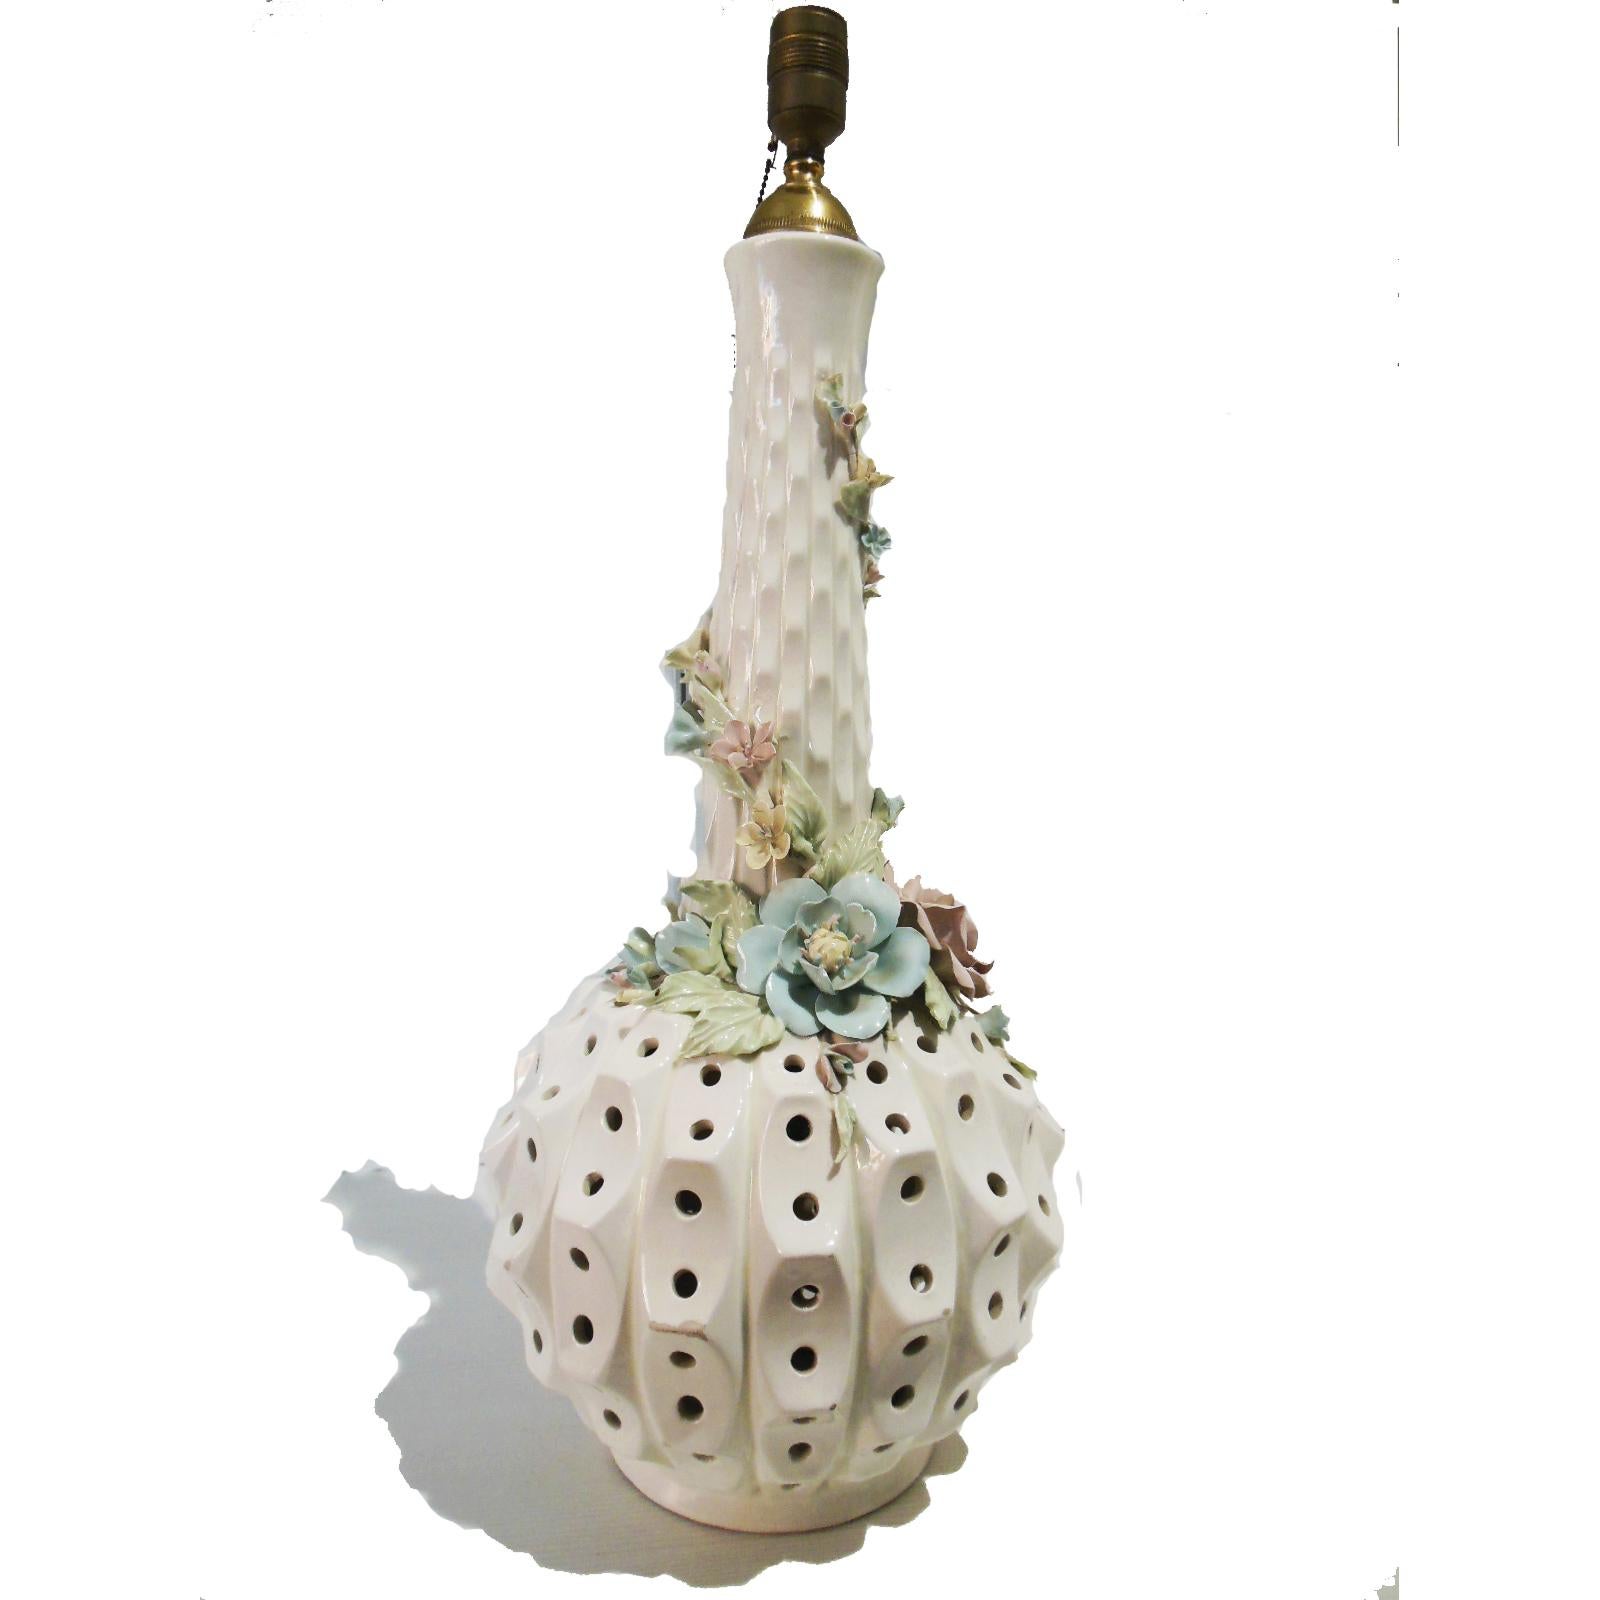 Interior lighting, and the lower part of the lamp. The uz comes out through the holes and it is spectacul

Buy in Manises Valencia Spain, place of production of ceramics and porcelain throughout the centuries
This lamp is a masterpiece, with a